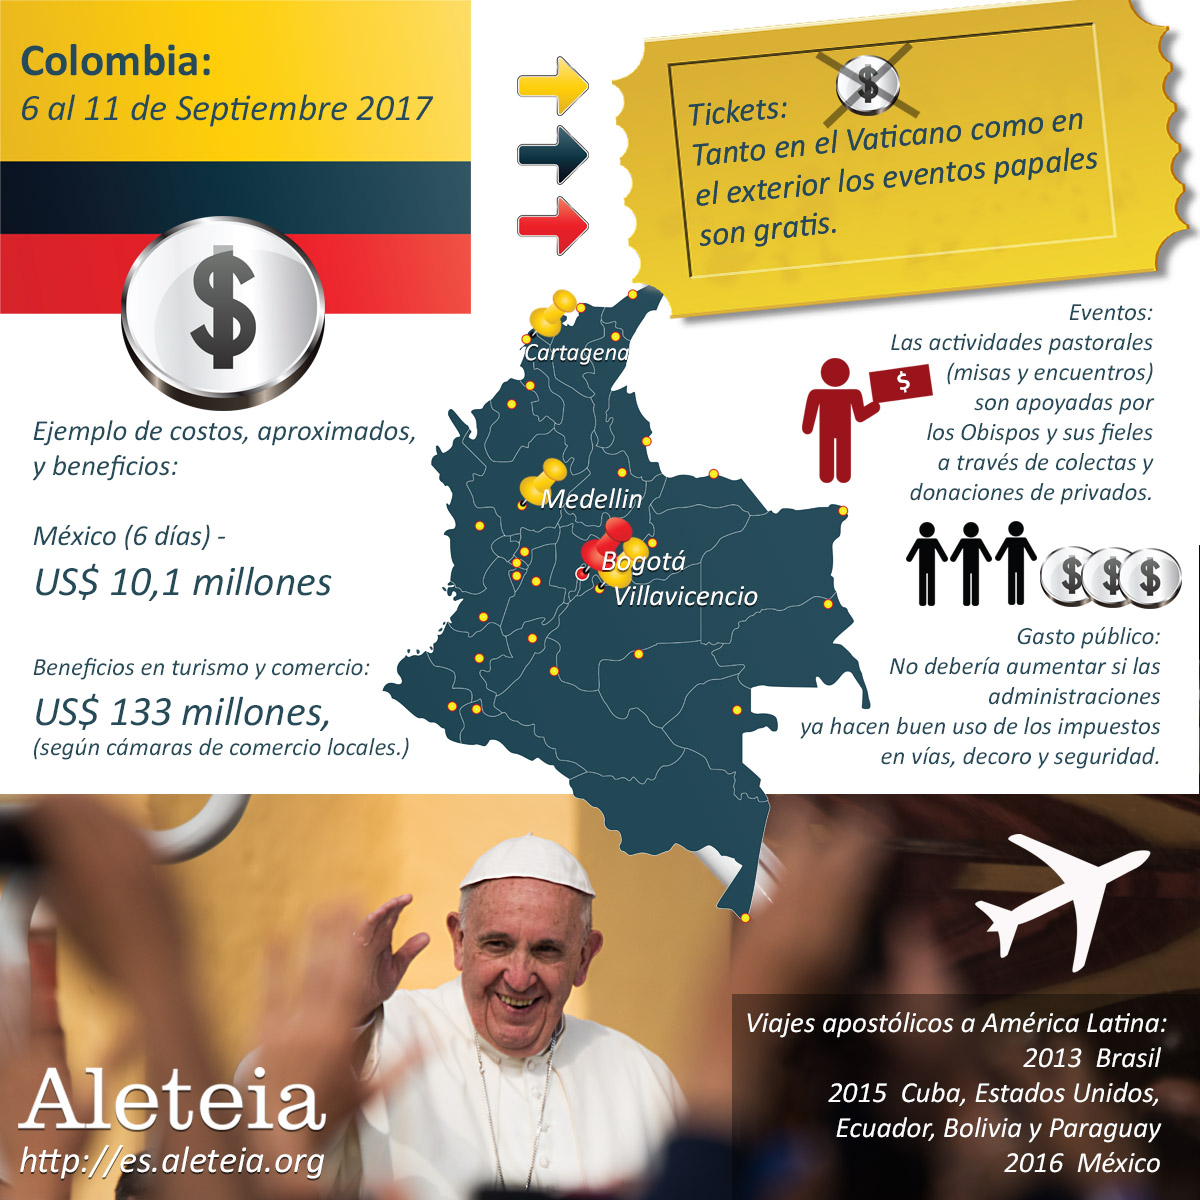 INFOGRAPHIC-POPE FRANCIS-COLOMBIA-2017-ALETEIA